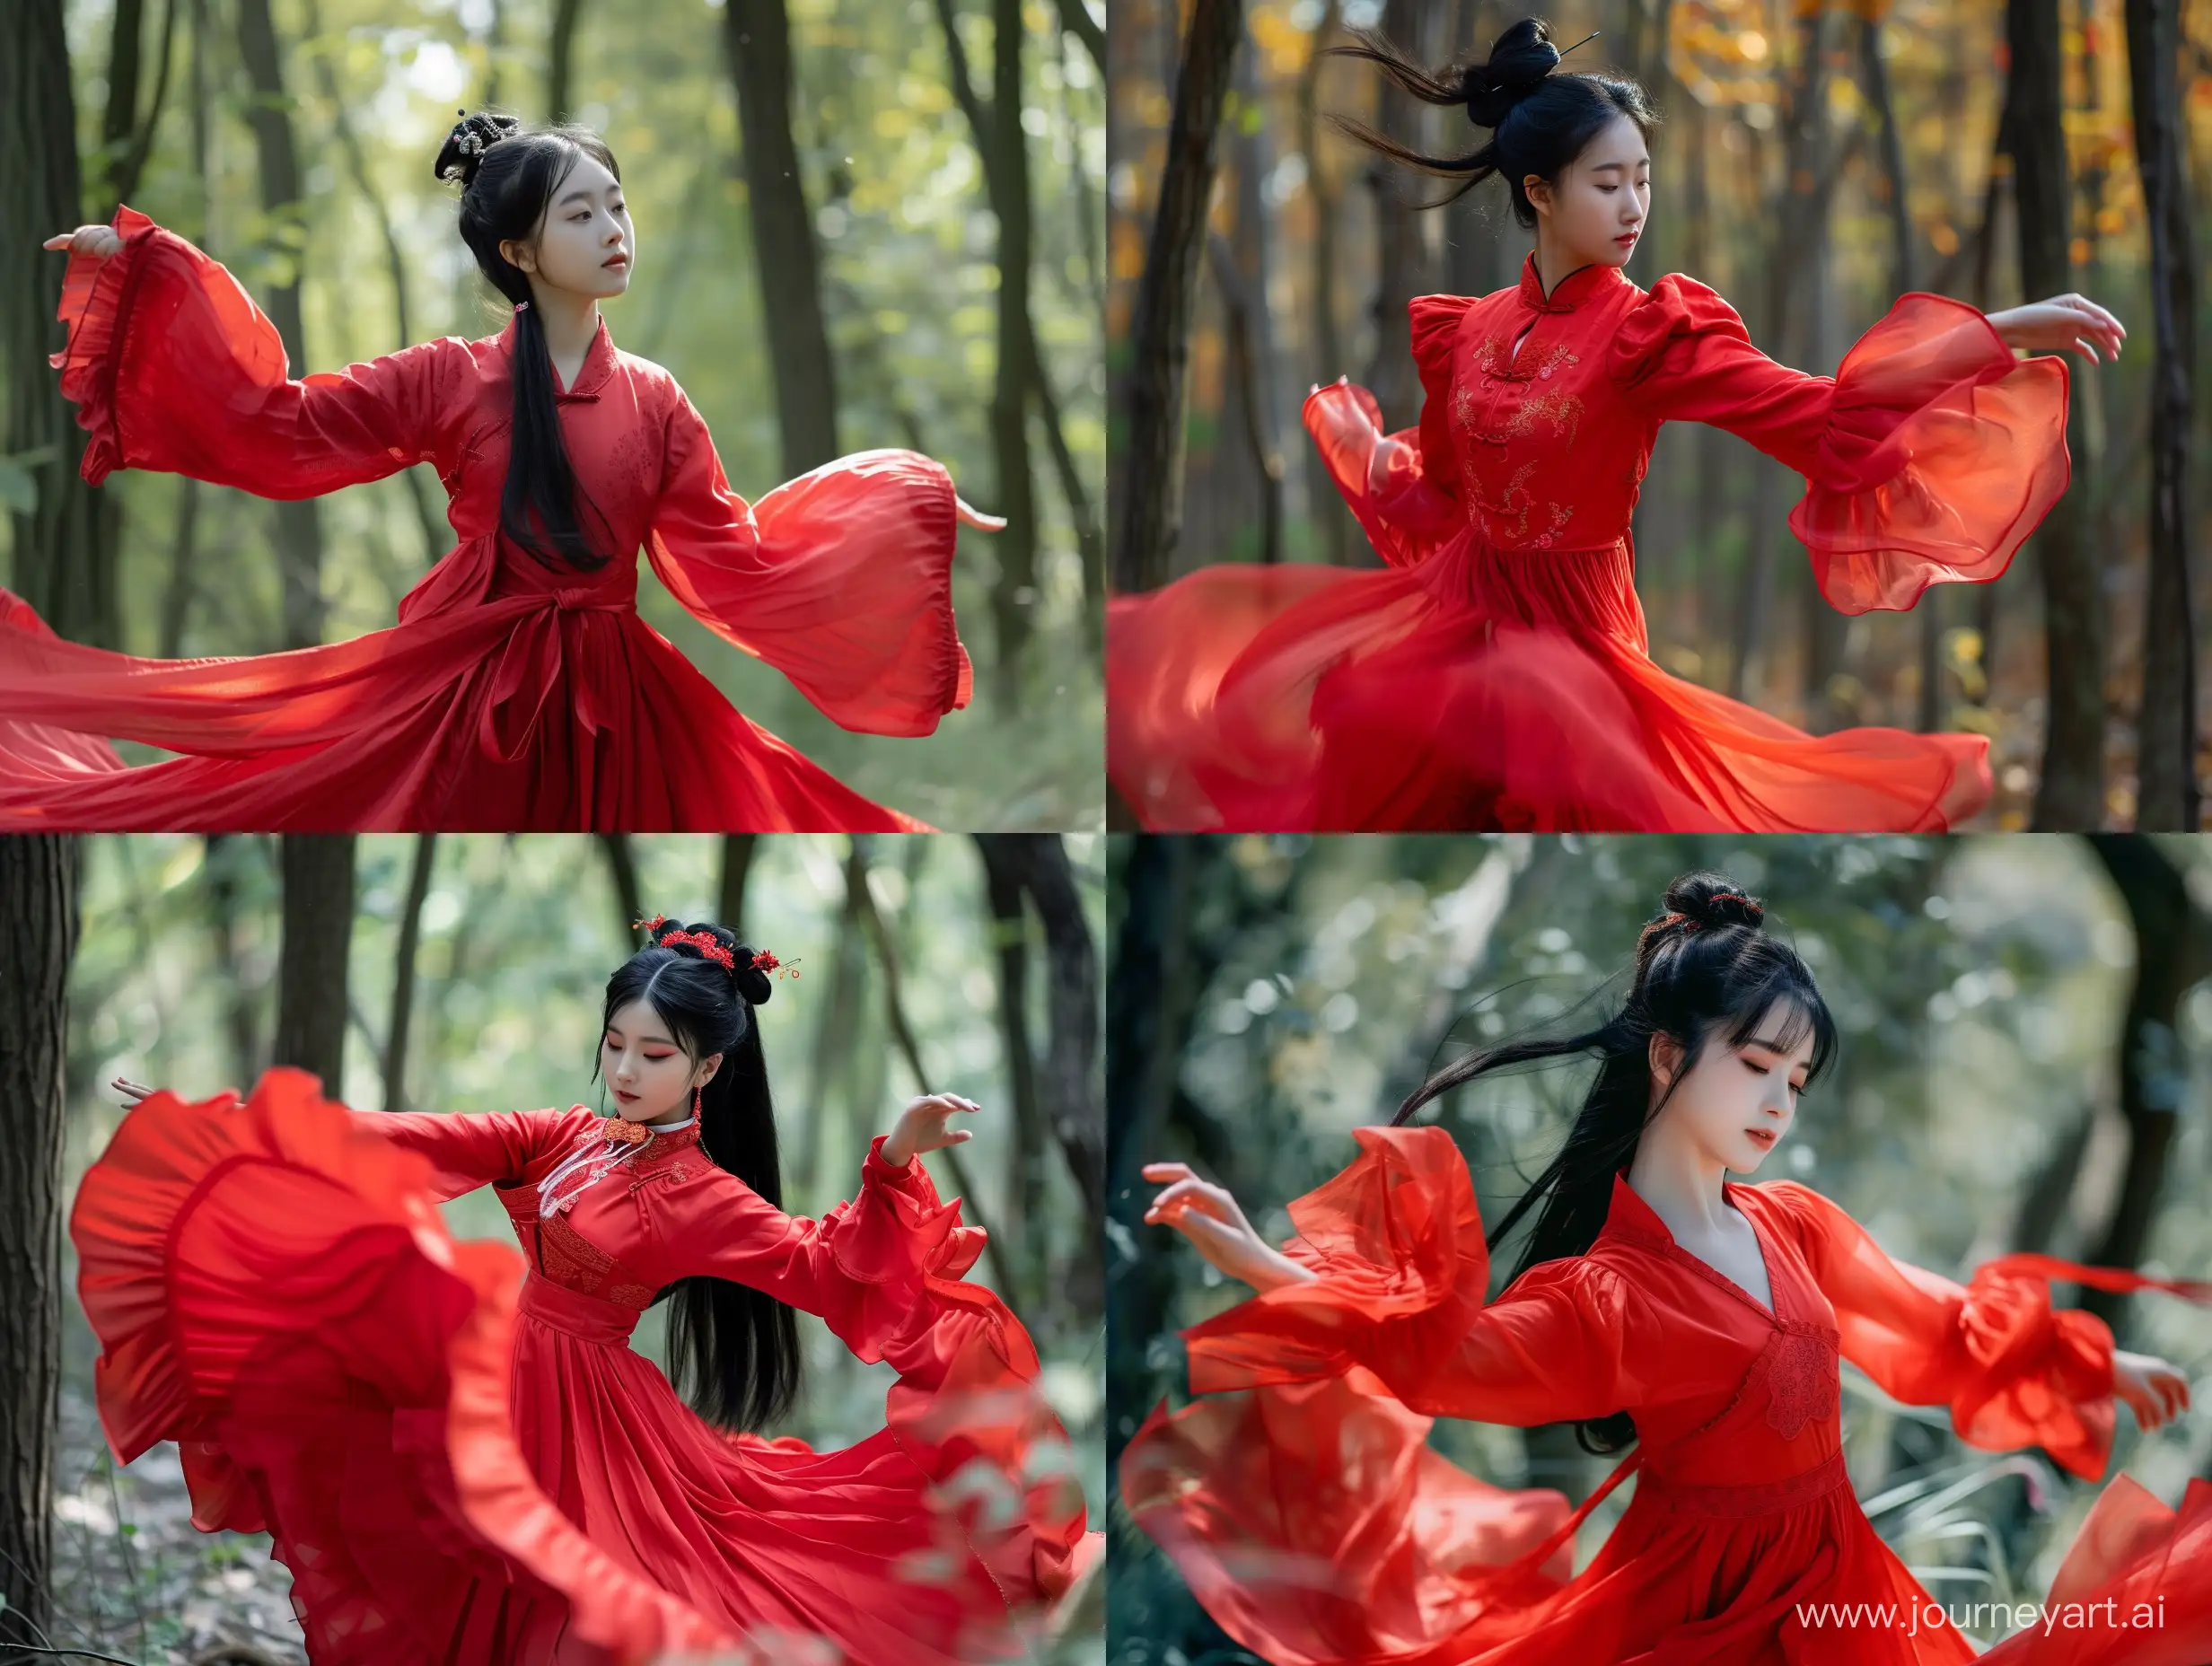 Enchanting-Chinese-Girl-Dancing-in-a-Vivid-Forest-Scene